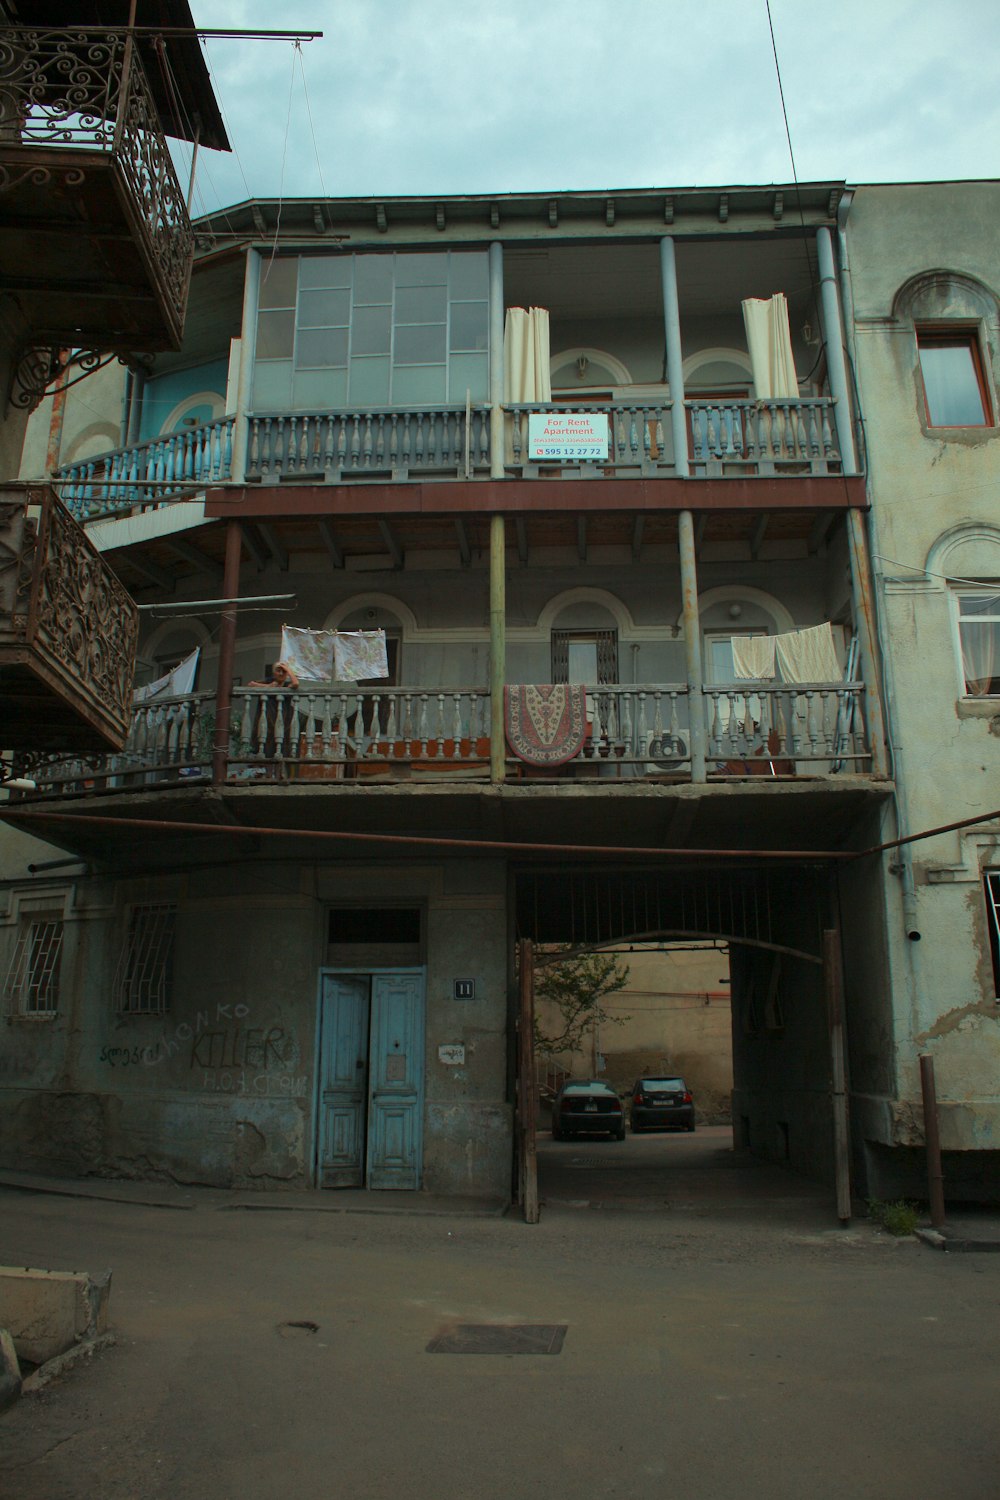 an old building with balconies and balconies on the balconies